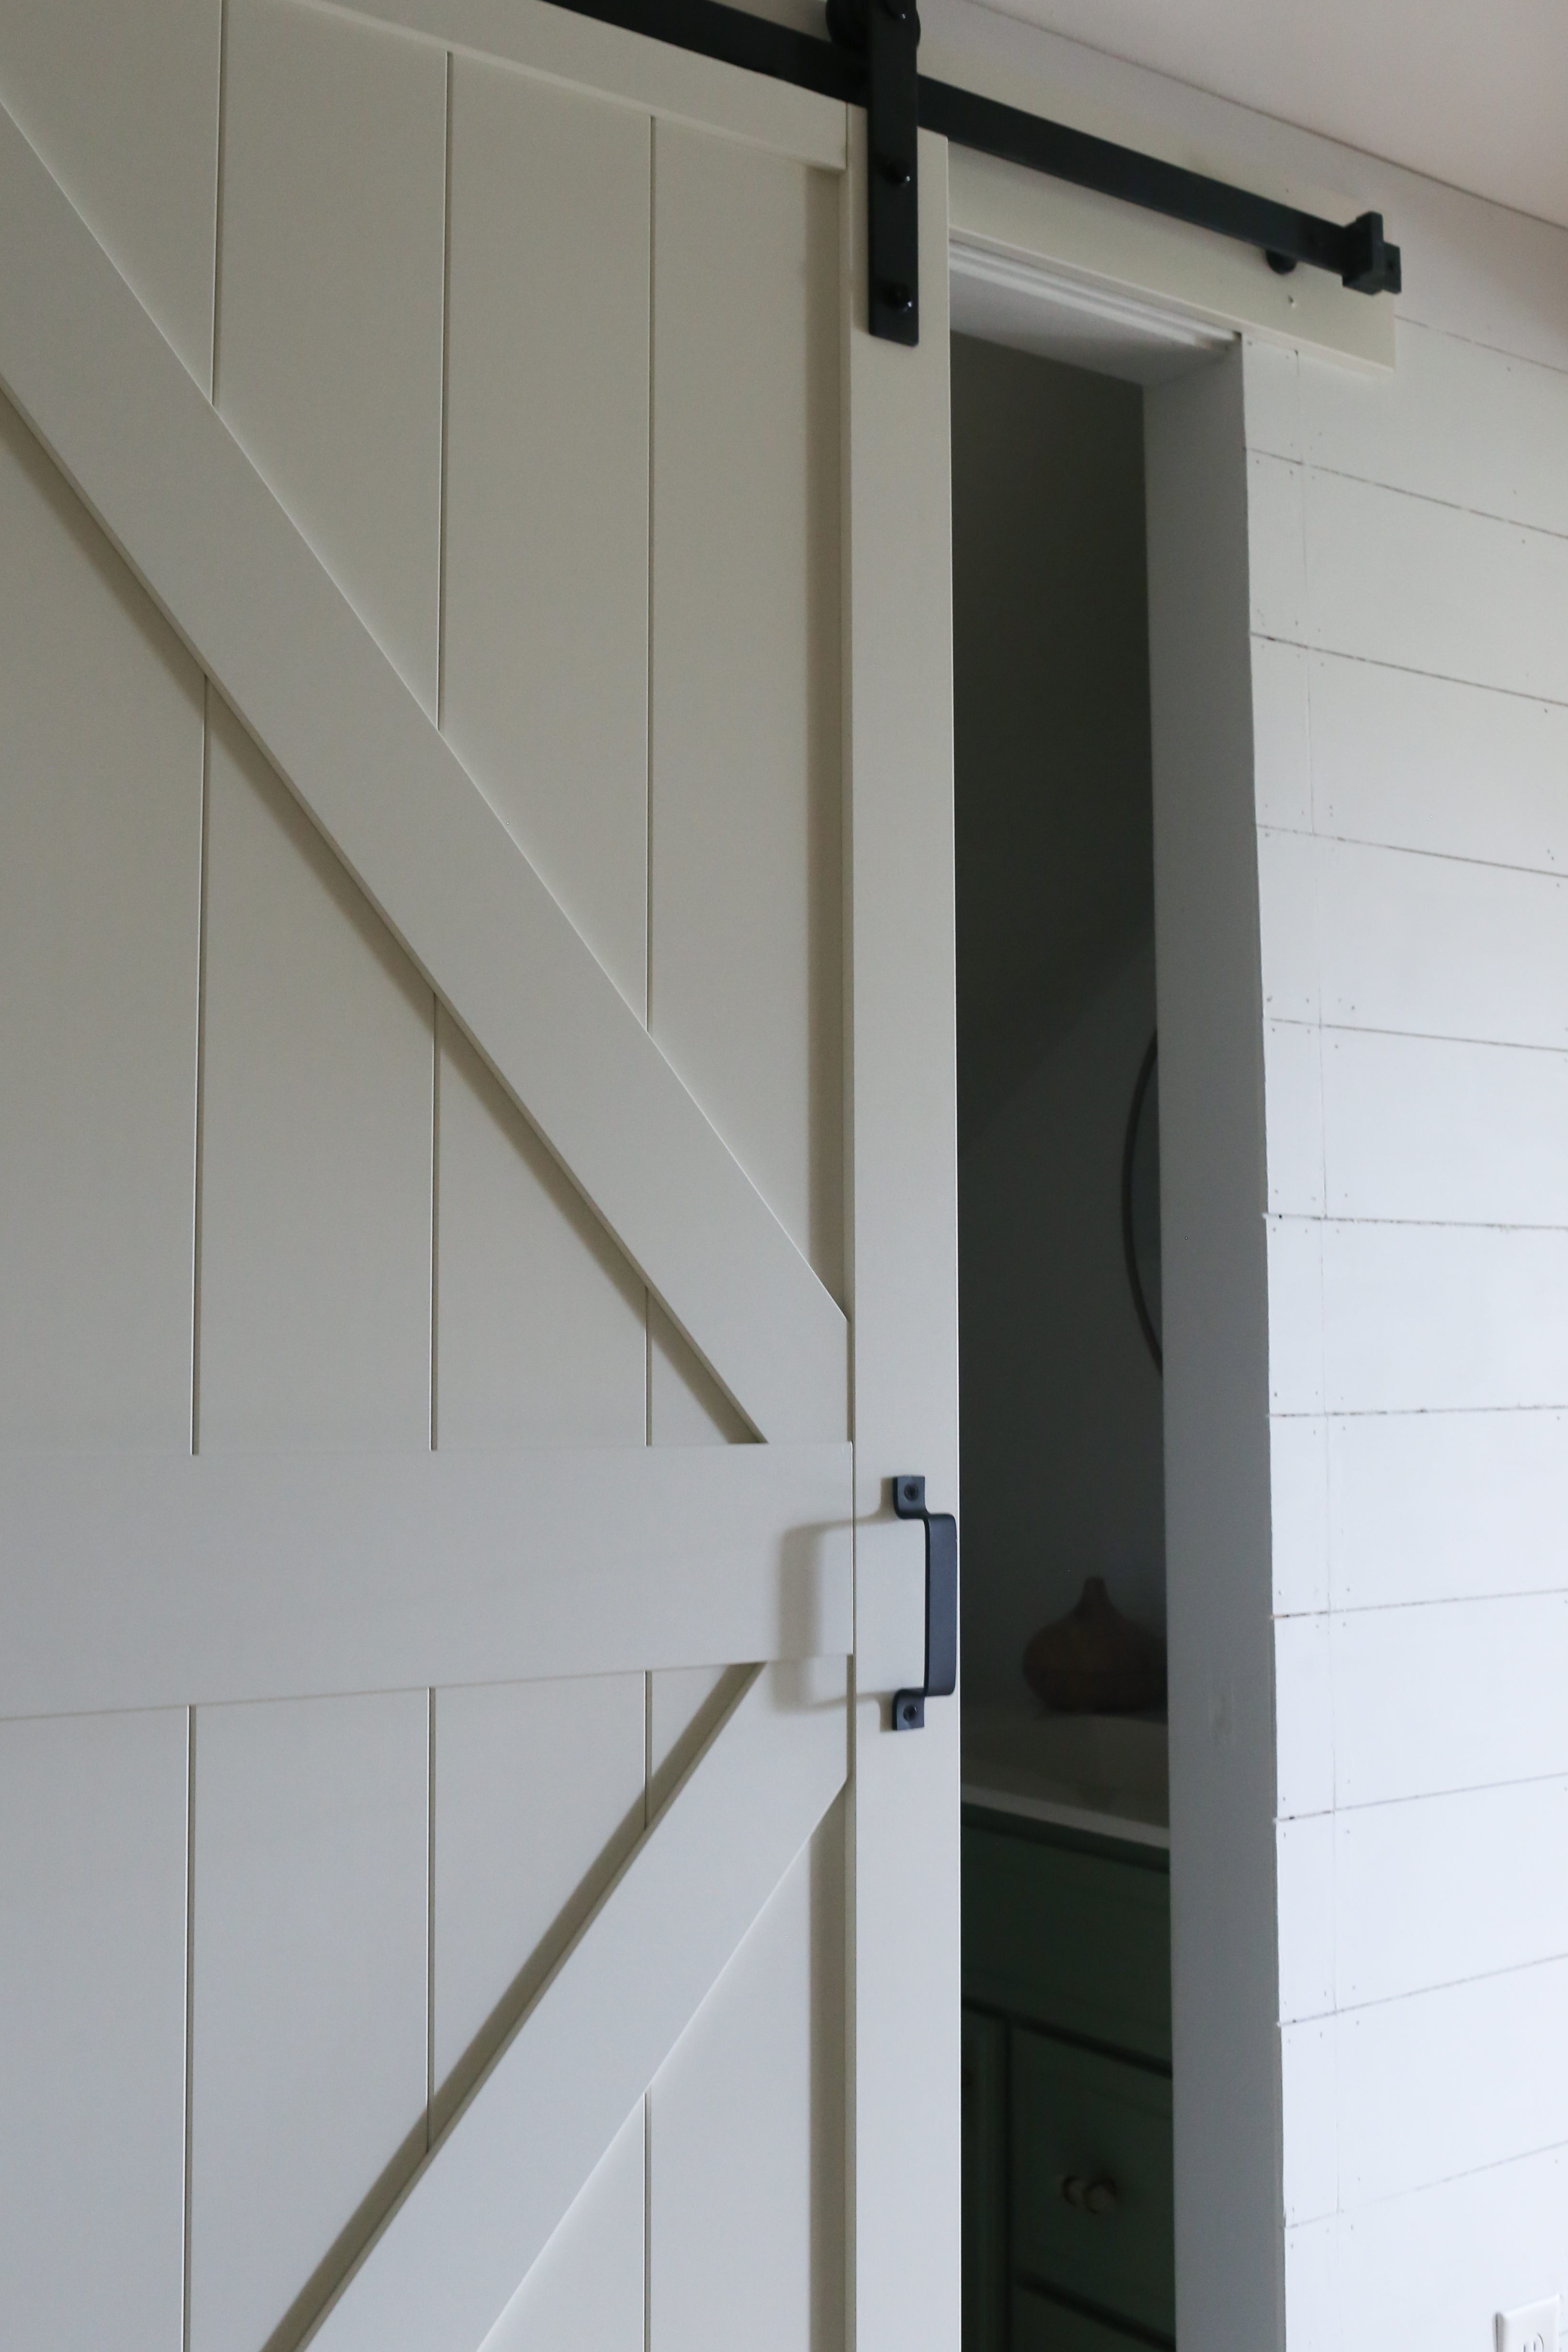 The builder basic hallway is updated to reflect the homes modern farmhouse style.